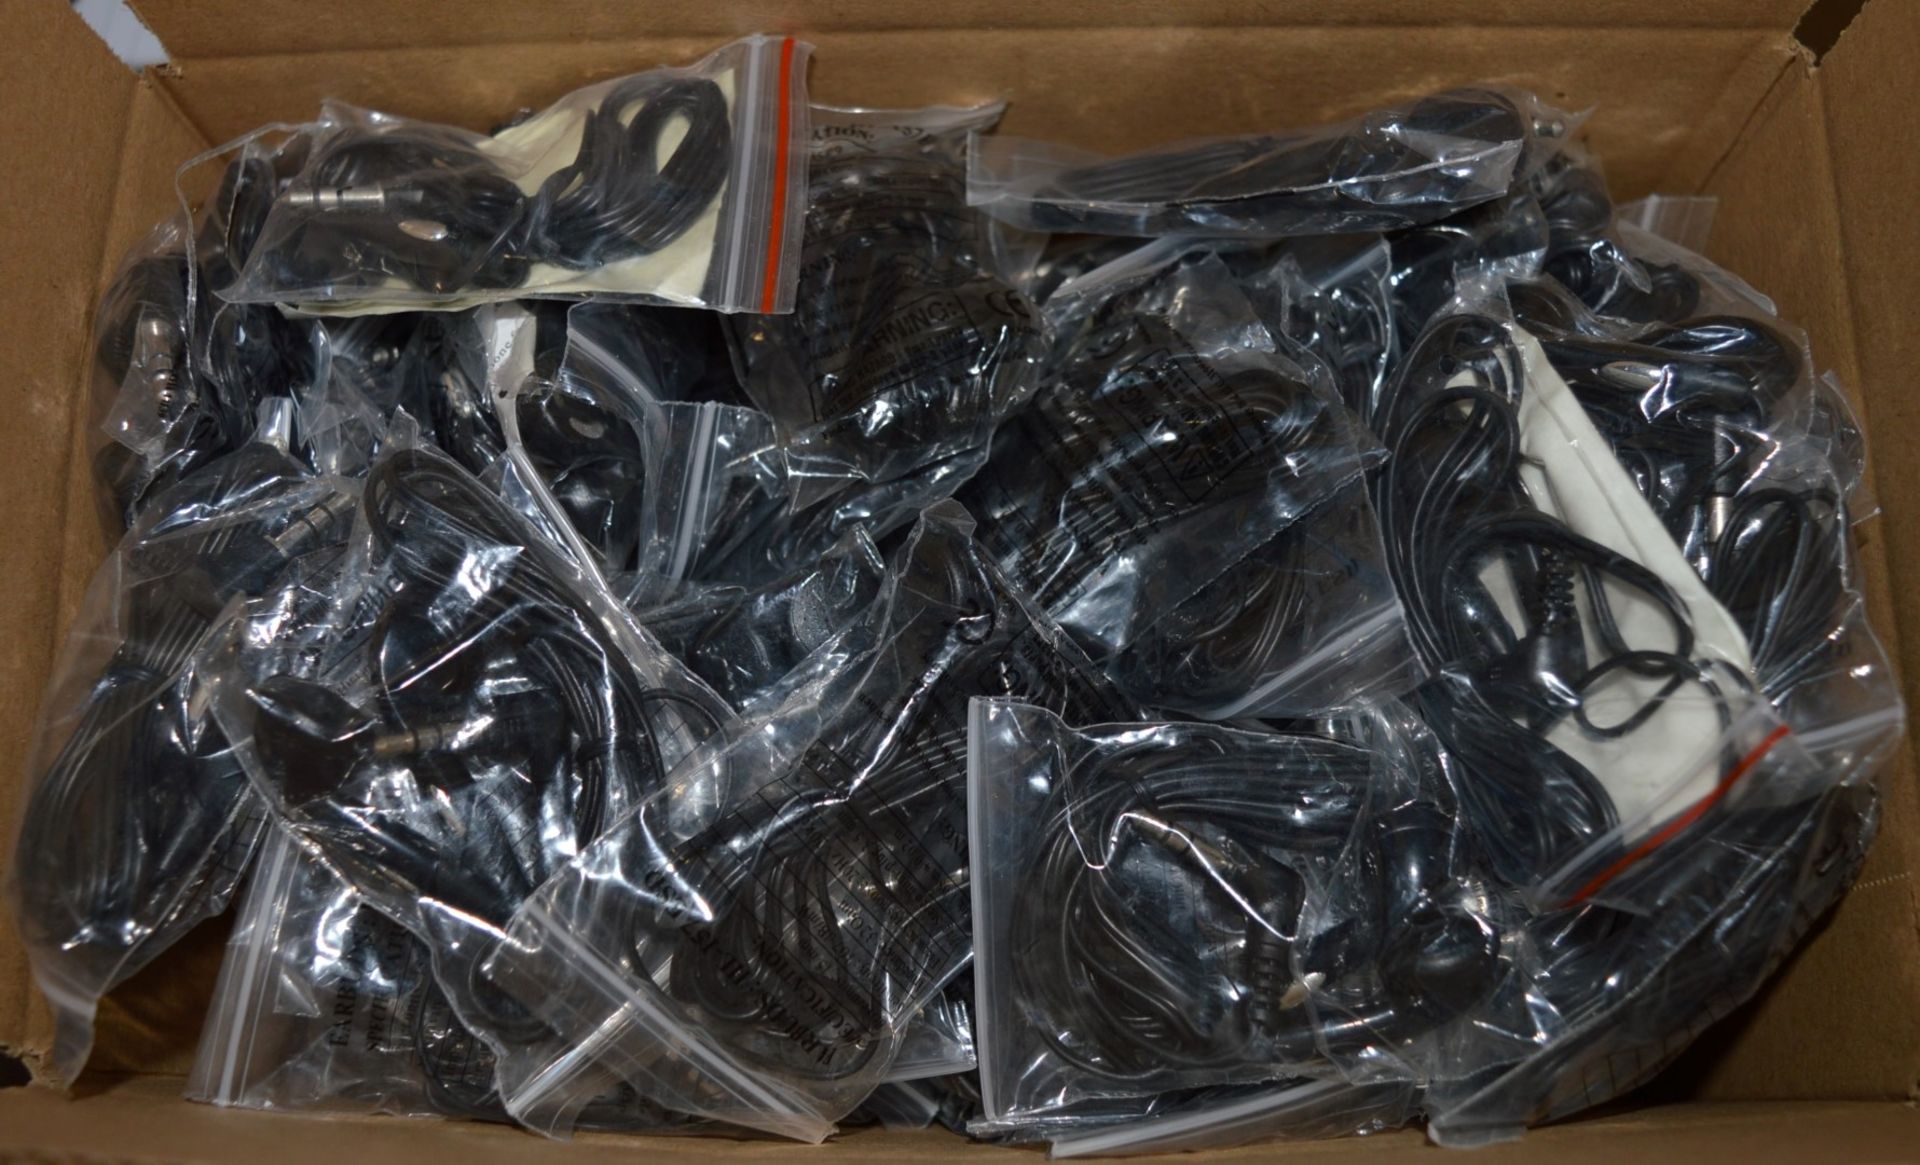 Approx 100 x Earbud Earphones - Type HL157 - 3.5mm Stereo Mini Plug - 32OHM - 107dB - New and Unused - Image 2 of 5